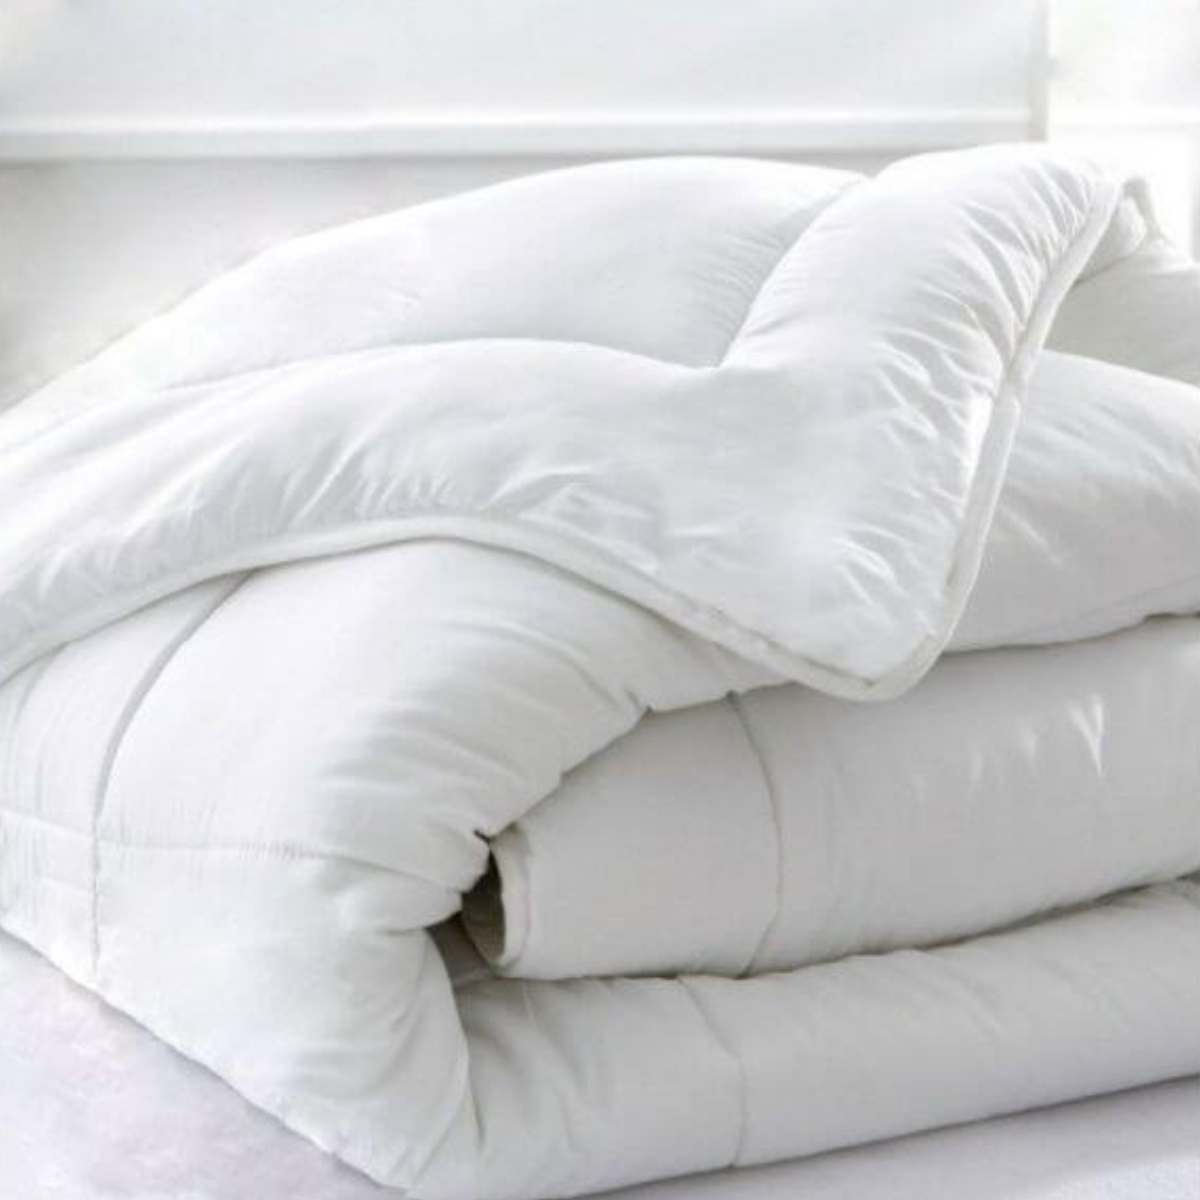 couette-hiver-coton-bio-220x240cm-400gm²-made-in-france